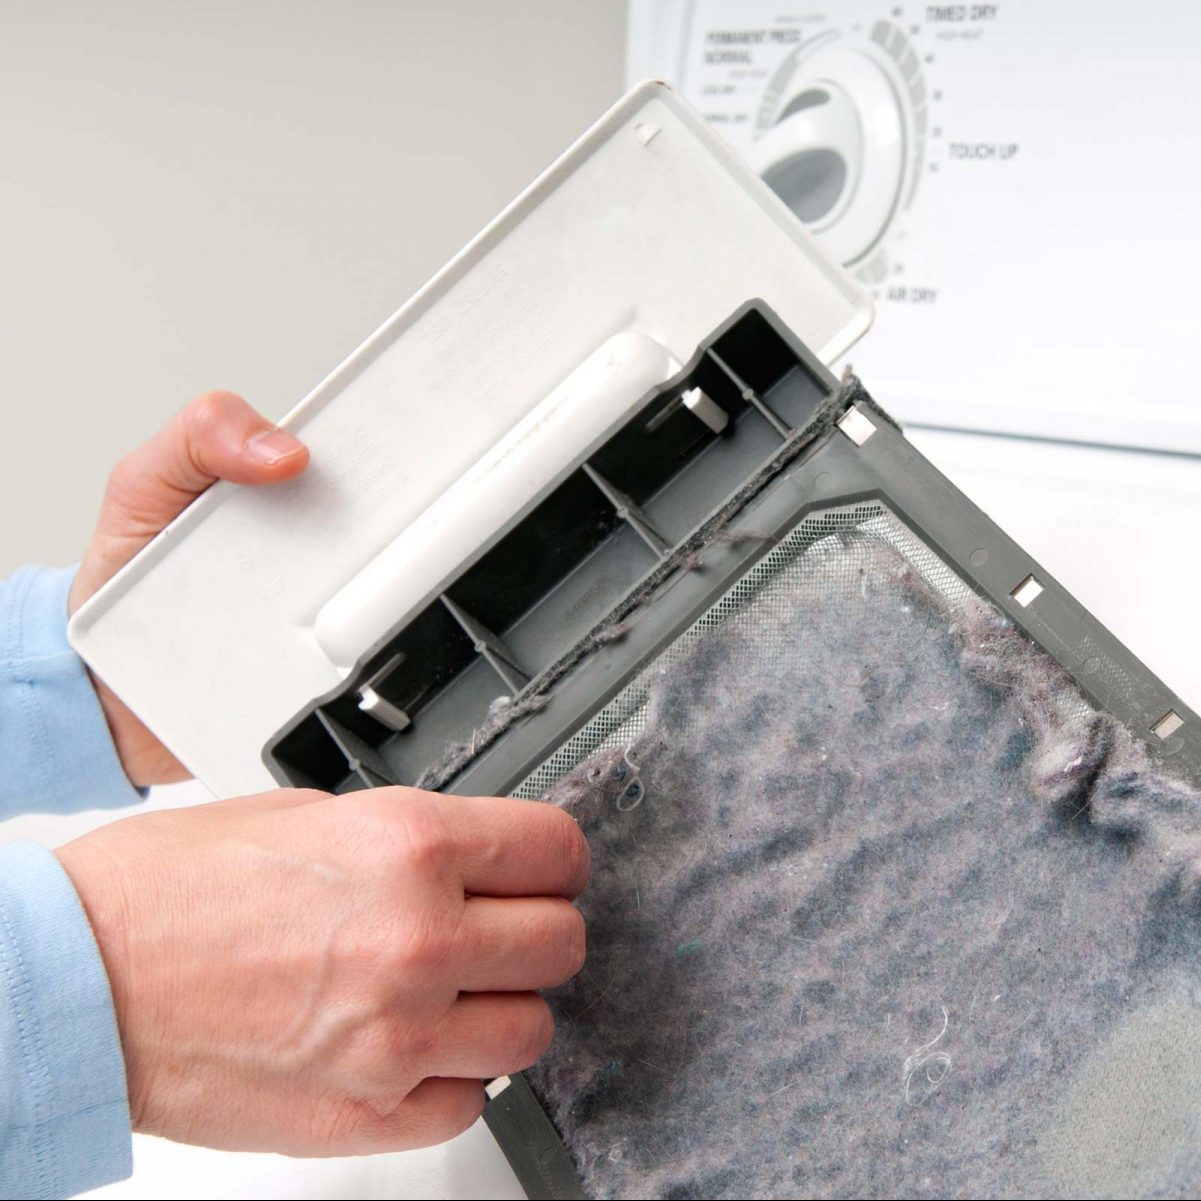 Dryer Lint Trap Instructions - Penn State College of Medicine